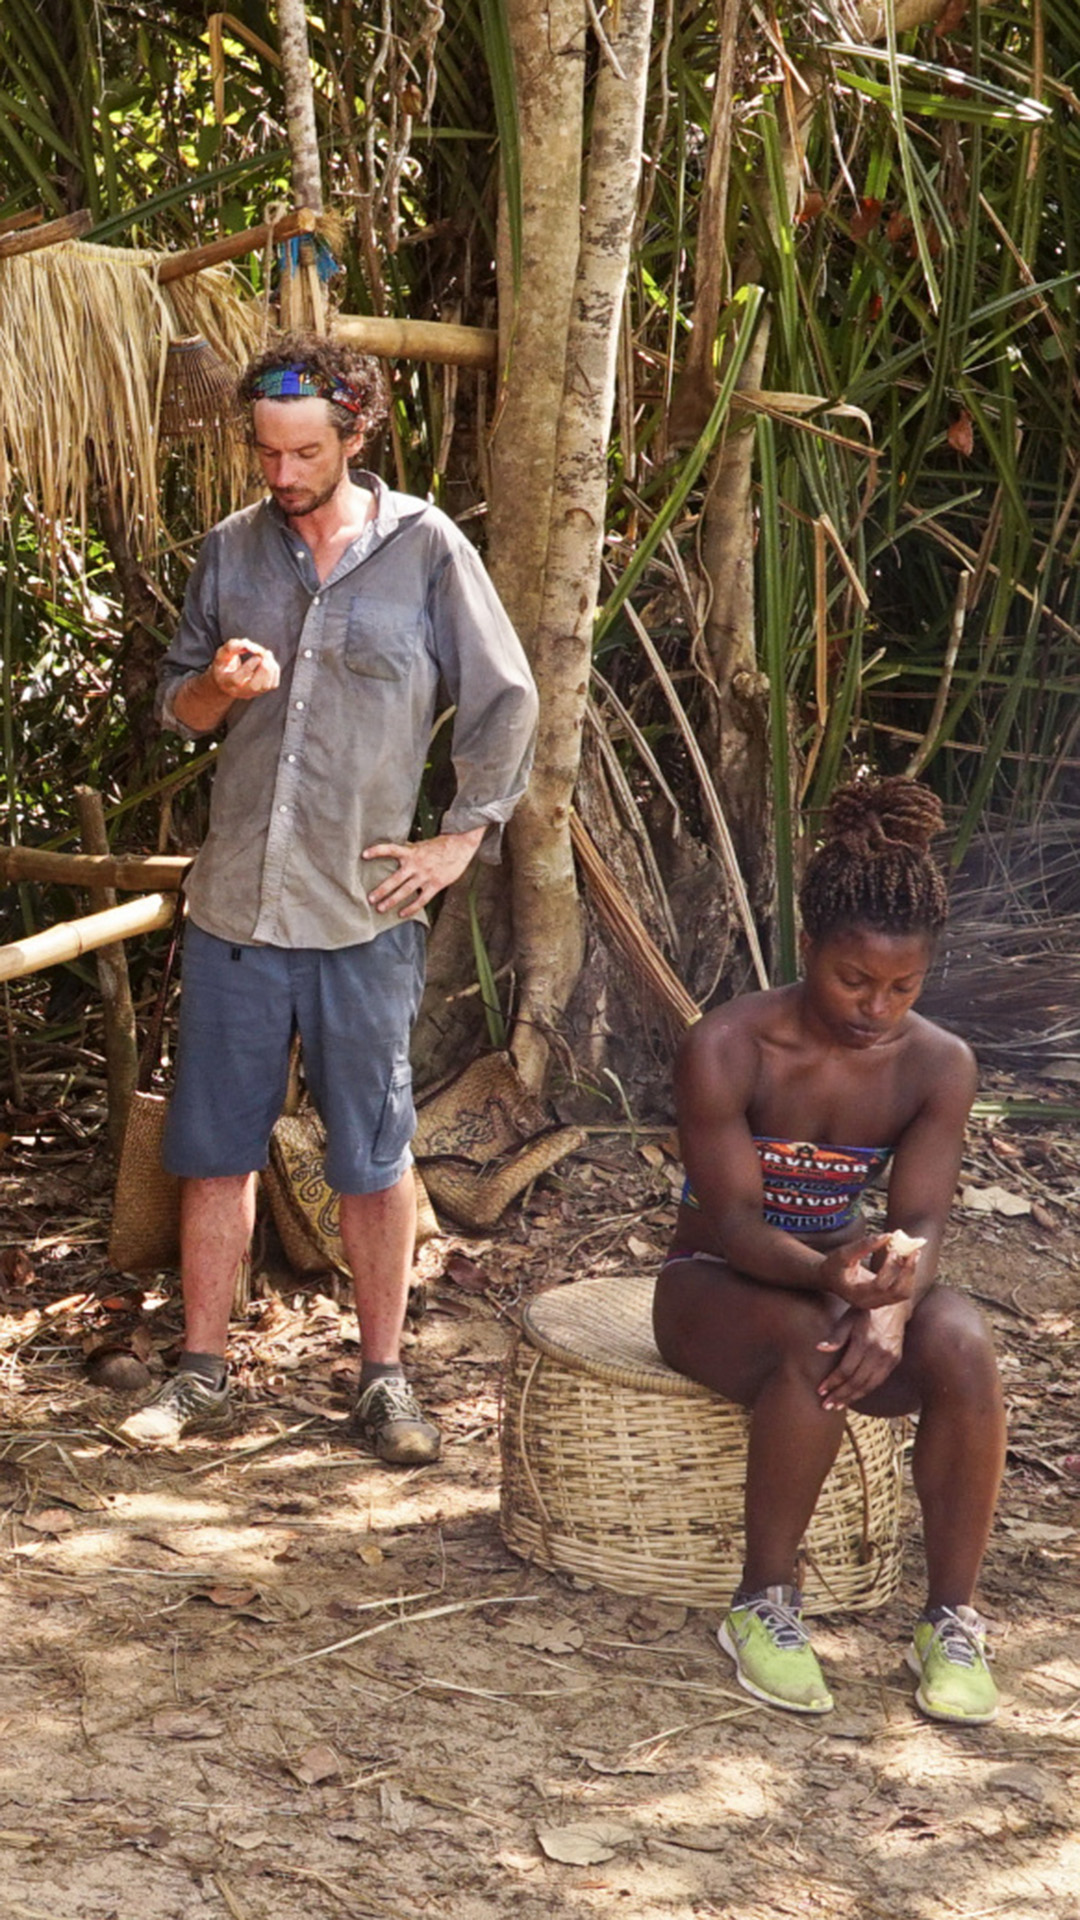 4. Looking back, would you have done anything differently during your Survivor run?